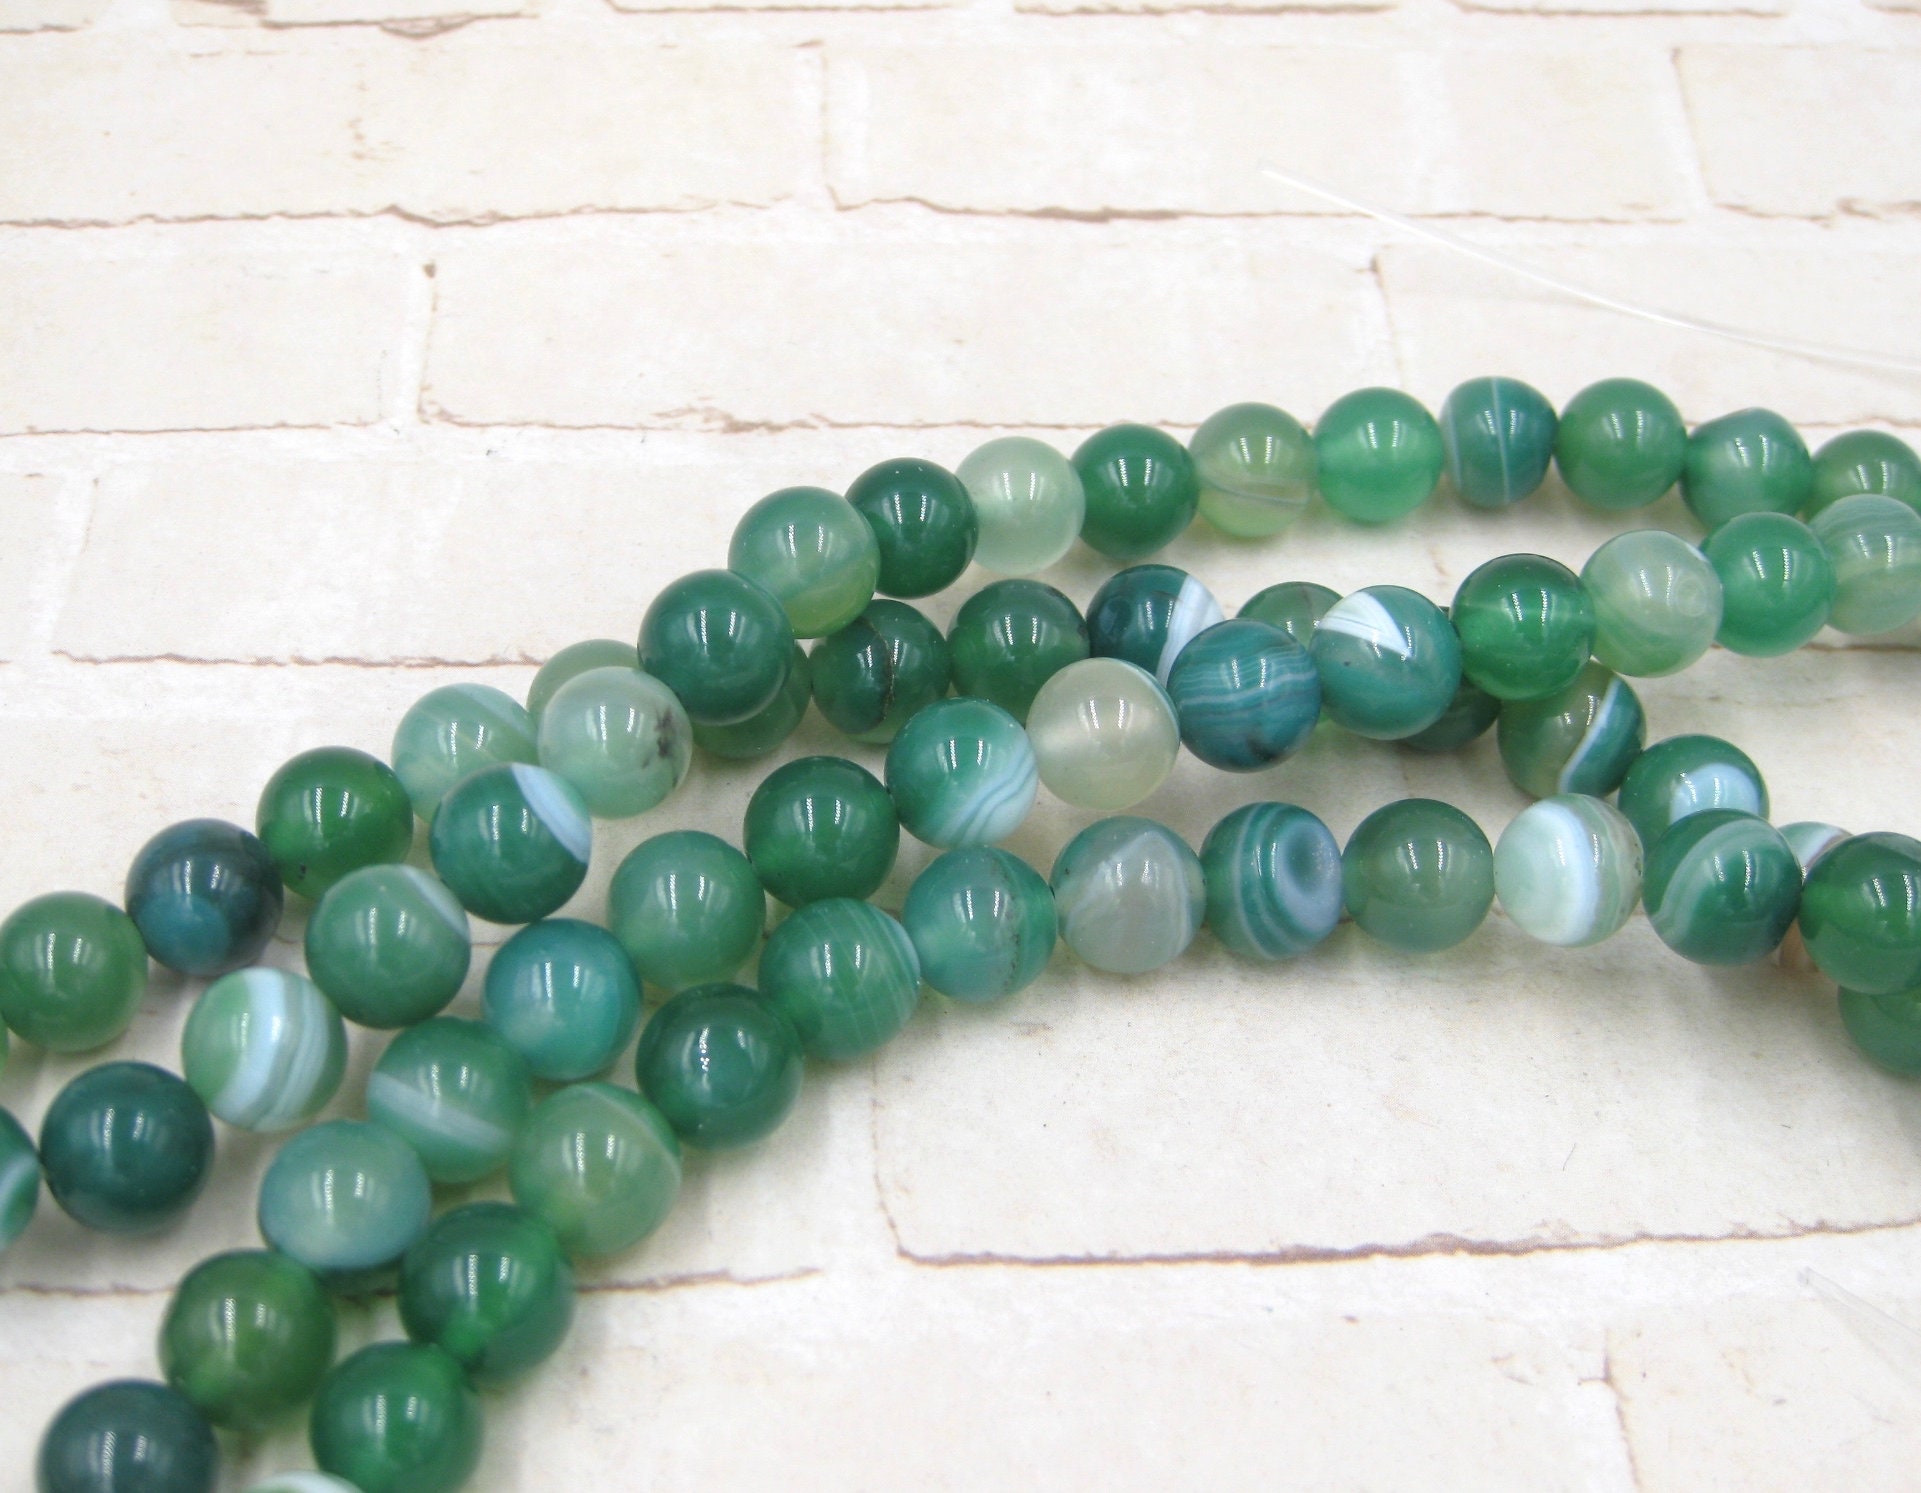 Green Agate Bead Banded Agate Striped Agate 8mm Agate - Etsy